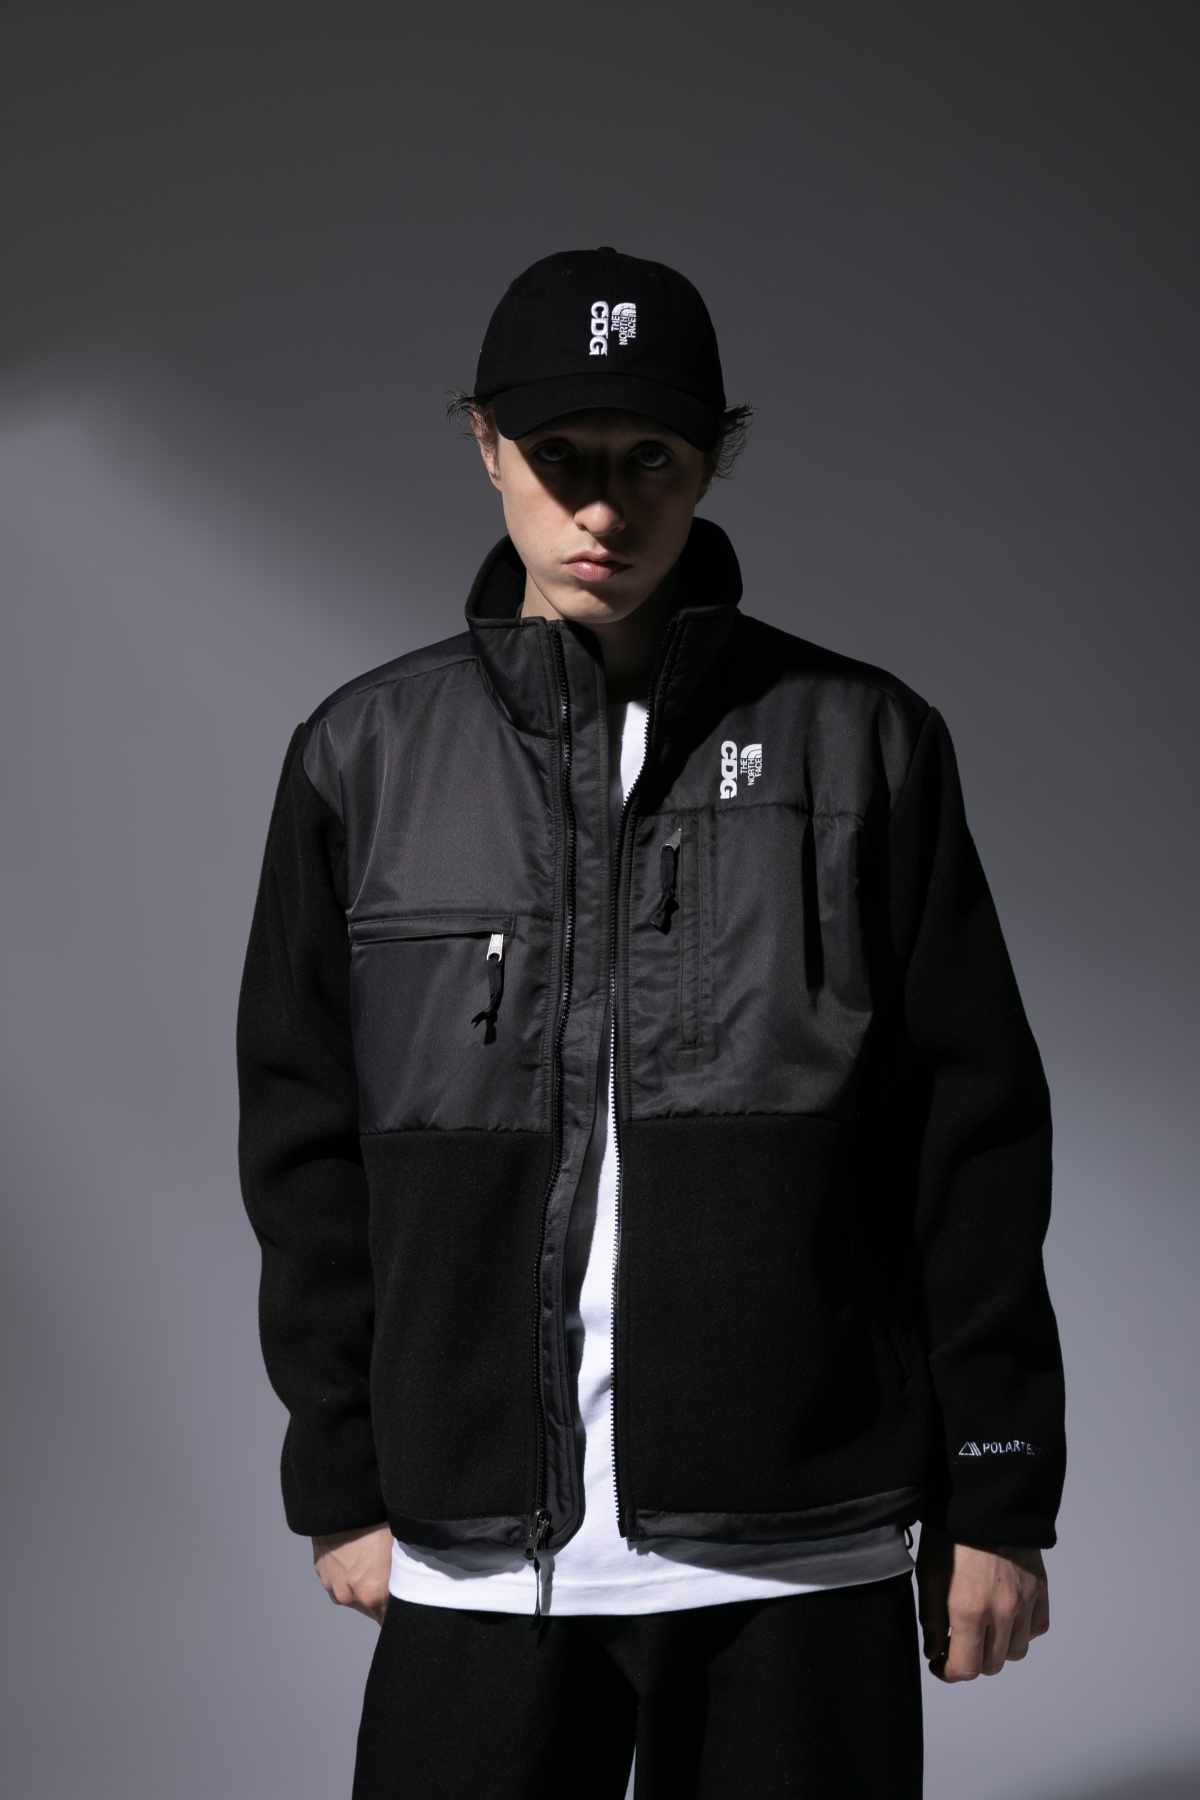 A male model wears the CDG x The North Face collaborative black hat and zip-up jacket